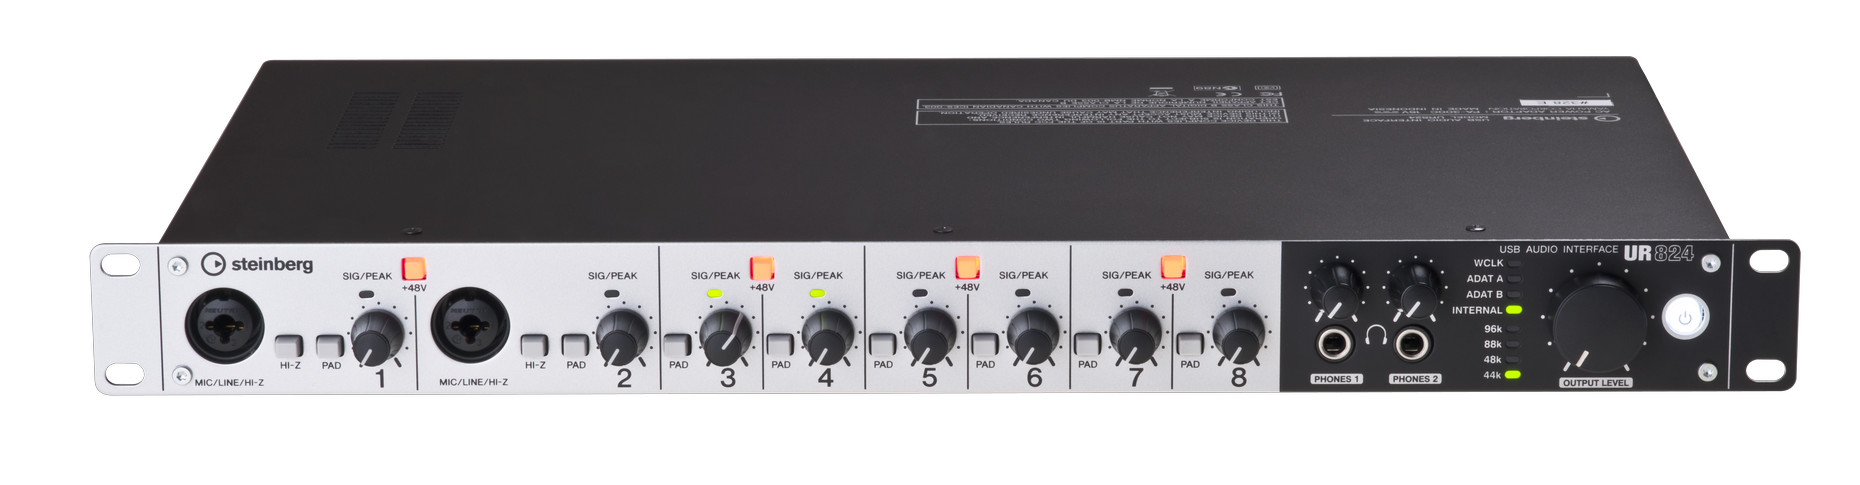 Steinberg UR28M and UR824 audio interfaces introduced